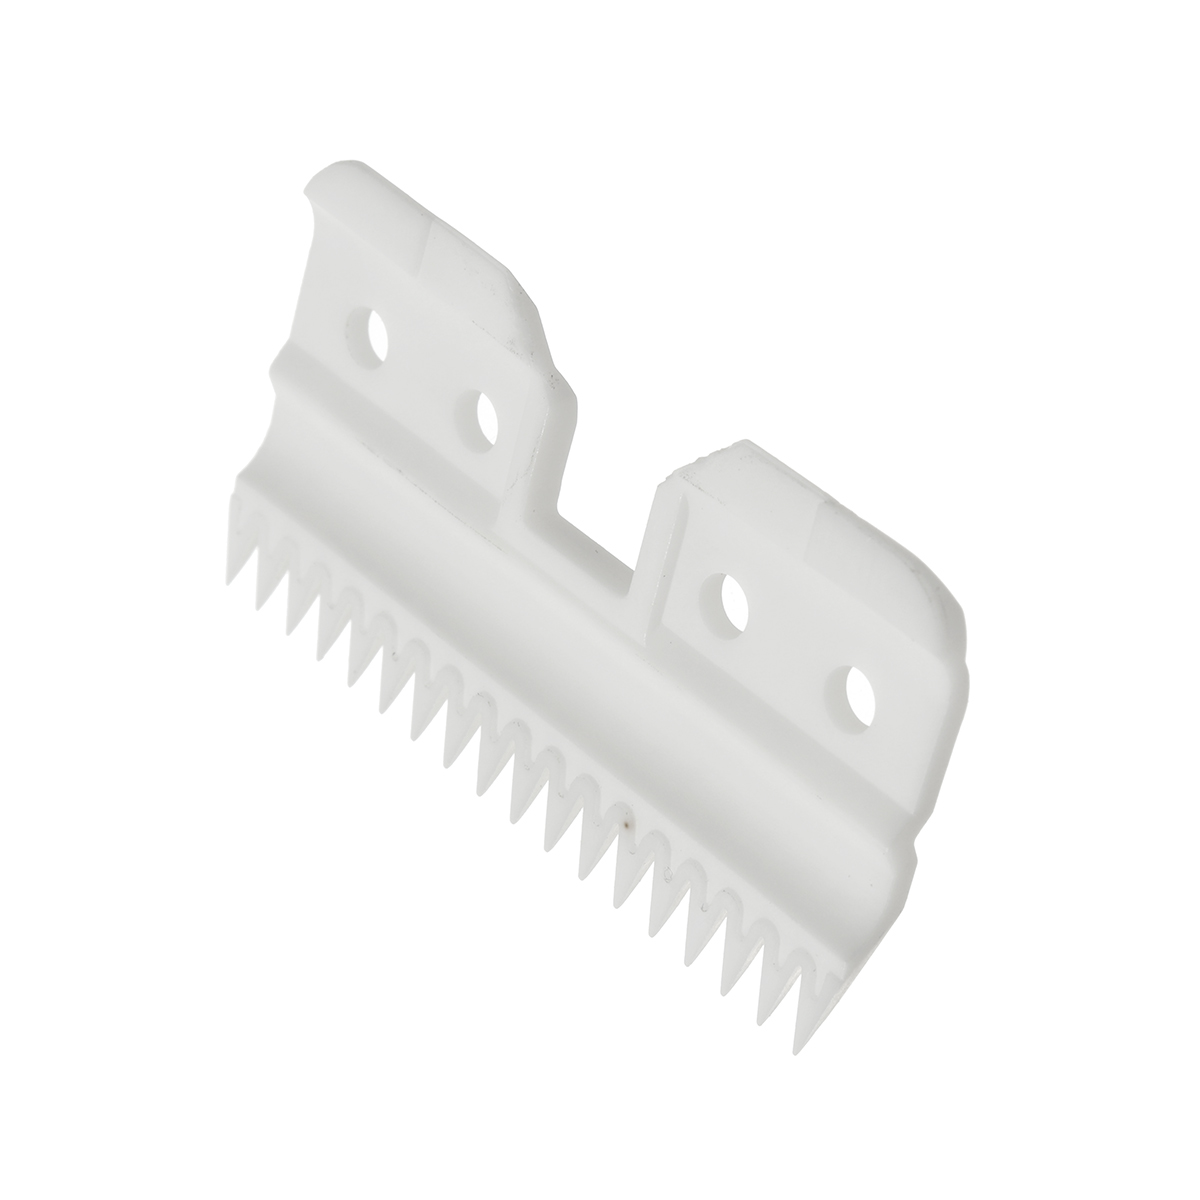 1x18-Teeth-Ceramic-Blade-Replacement-Accessories-For-OSTER-A5-Series-Clipper-Blades-Cutter-1561061-4